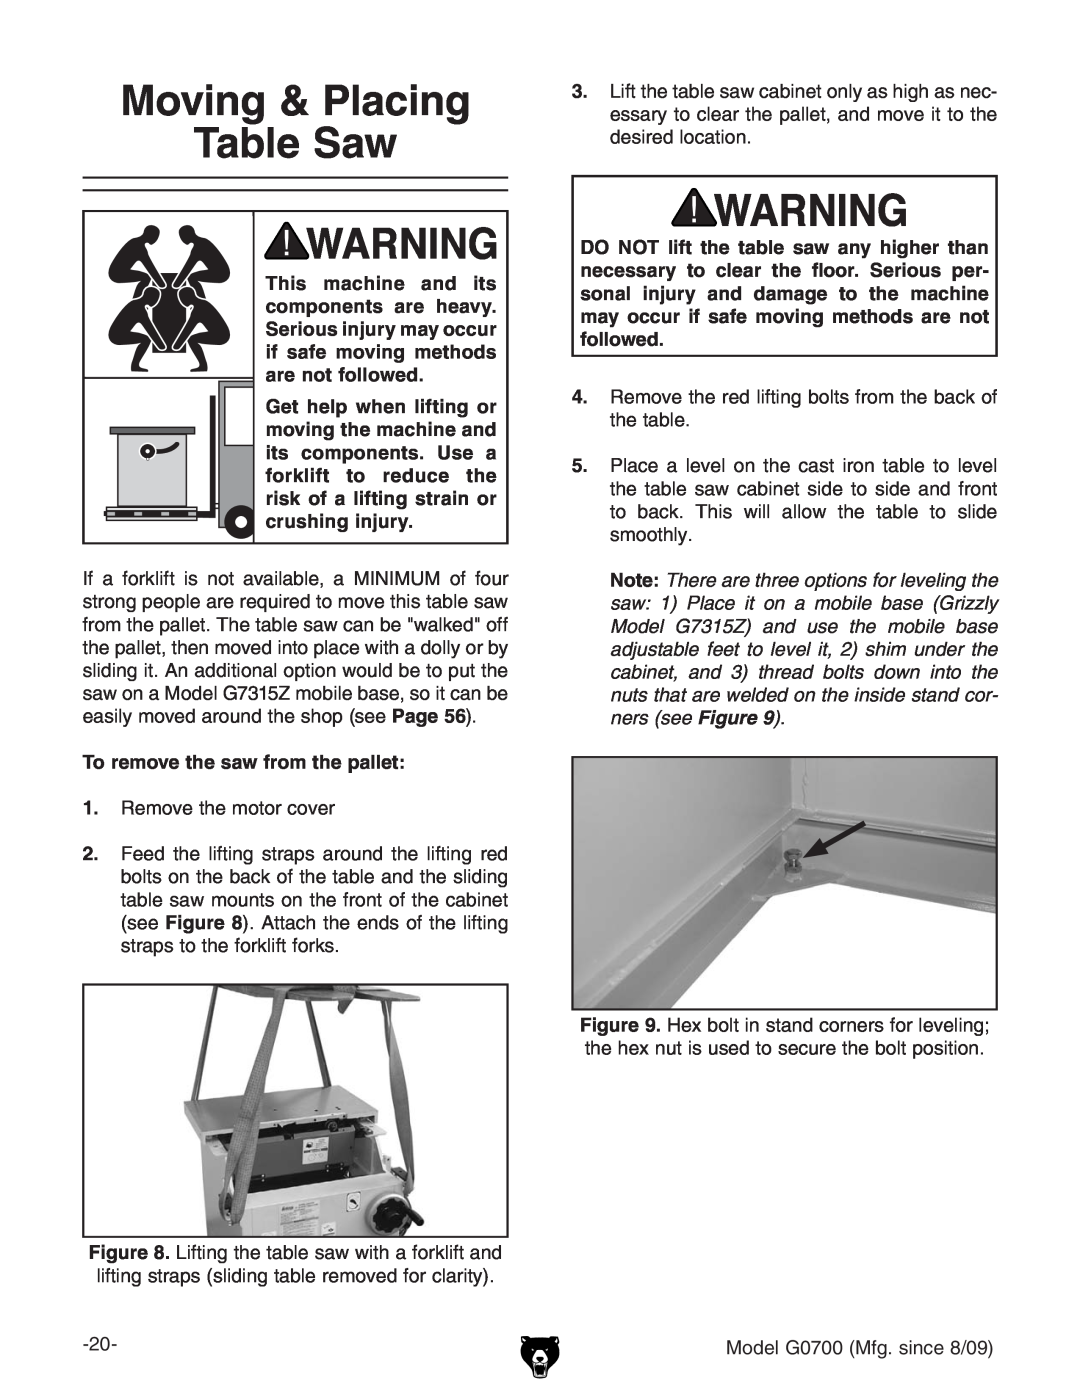 Grizzly G0700 owner manual Moving & Placing Table Saw, Note There are three options for leveling the 